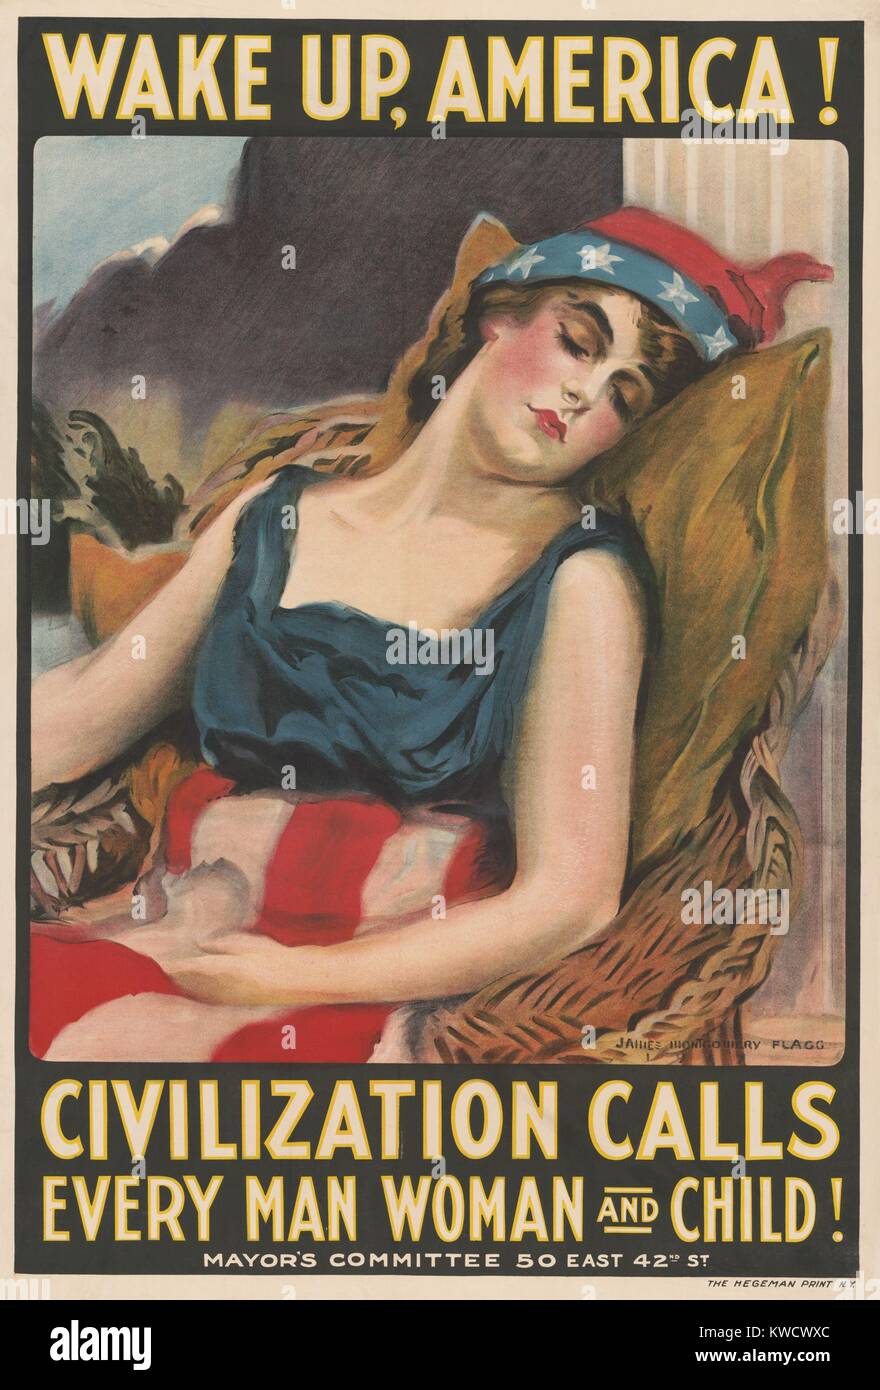 WAKE UP AMERICA! World War 1 poster for of April 1917, by James Montgomery Flagg. Actress Mary Arthur was Flaggs model for Columbia. Liberty is shown asleep, wearing patriotic stars and stripes and a Phrygian cap--a symbol of freedom since Roman times. S (BSLOC 2017 1 47) Stock Photo